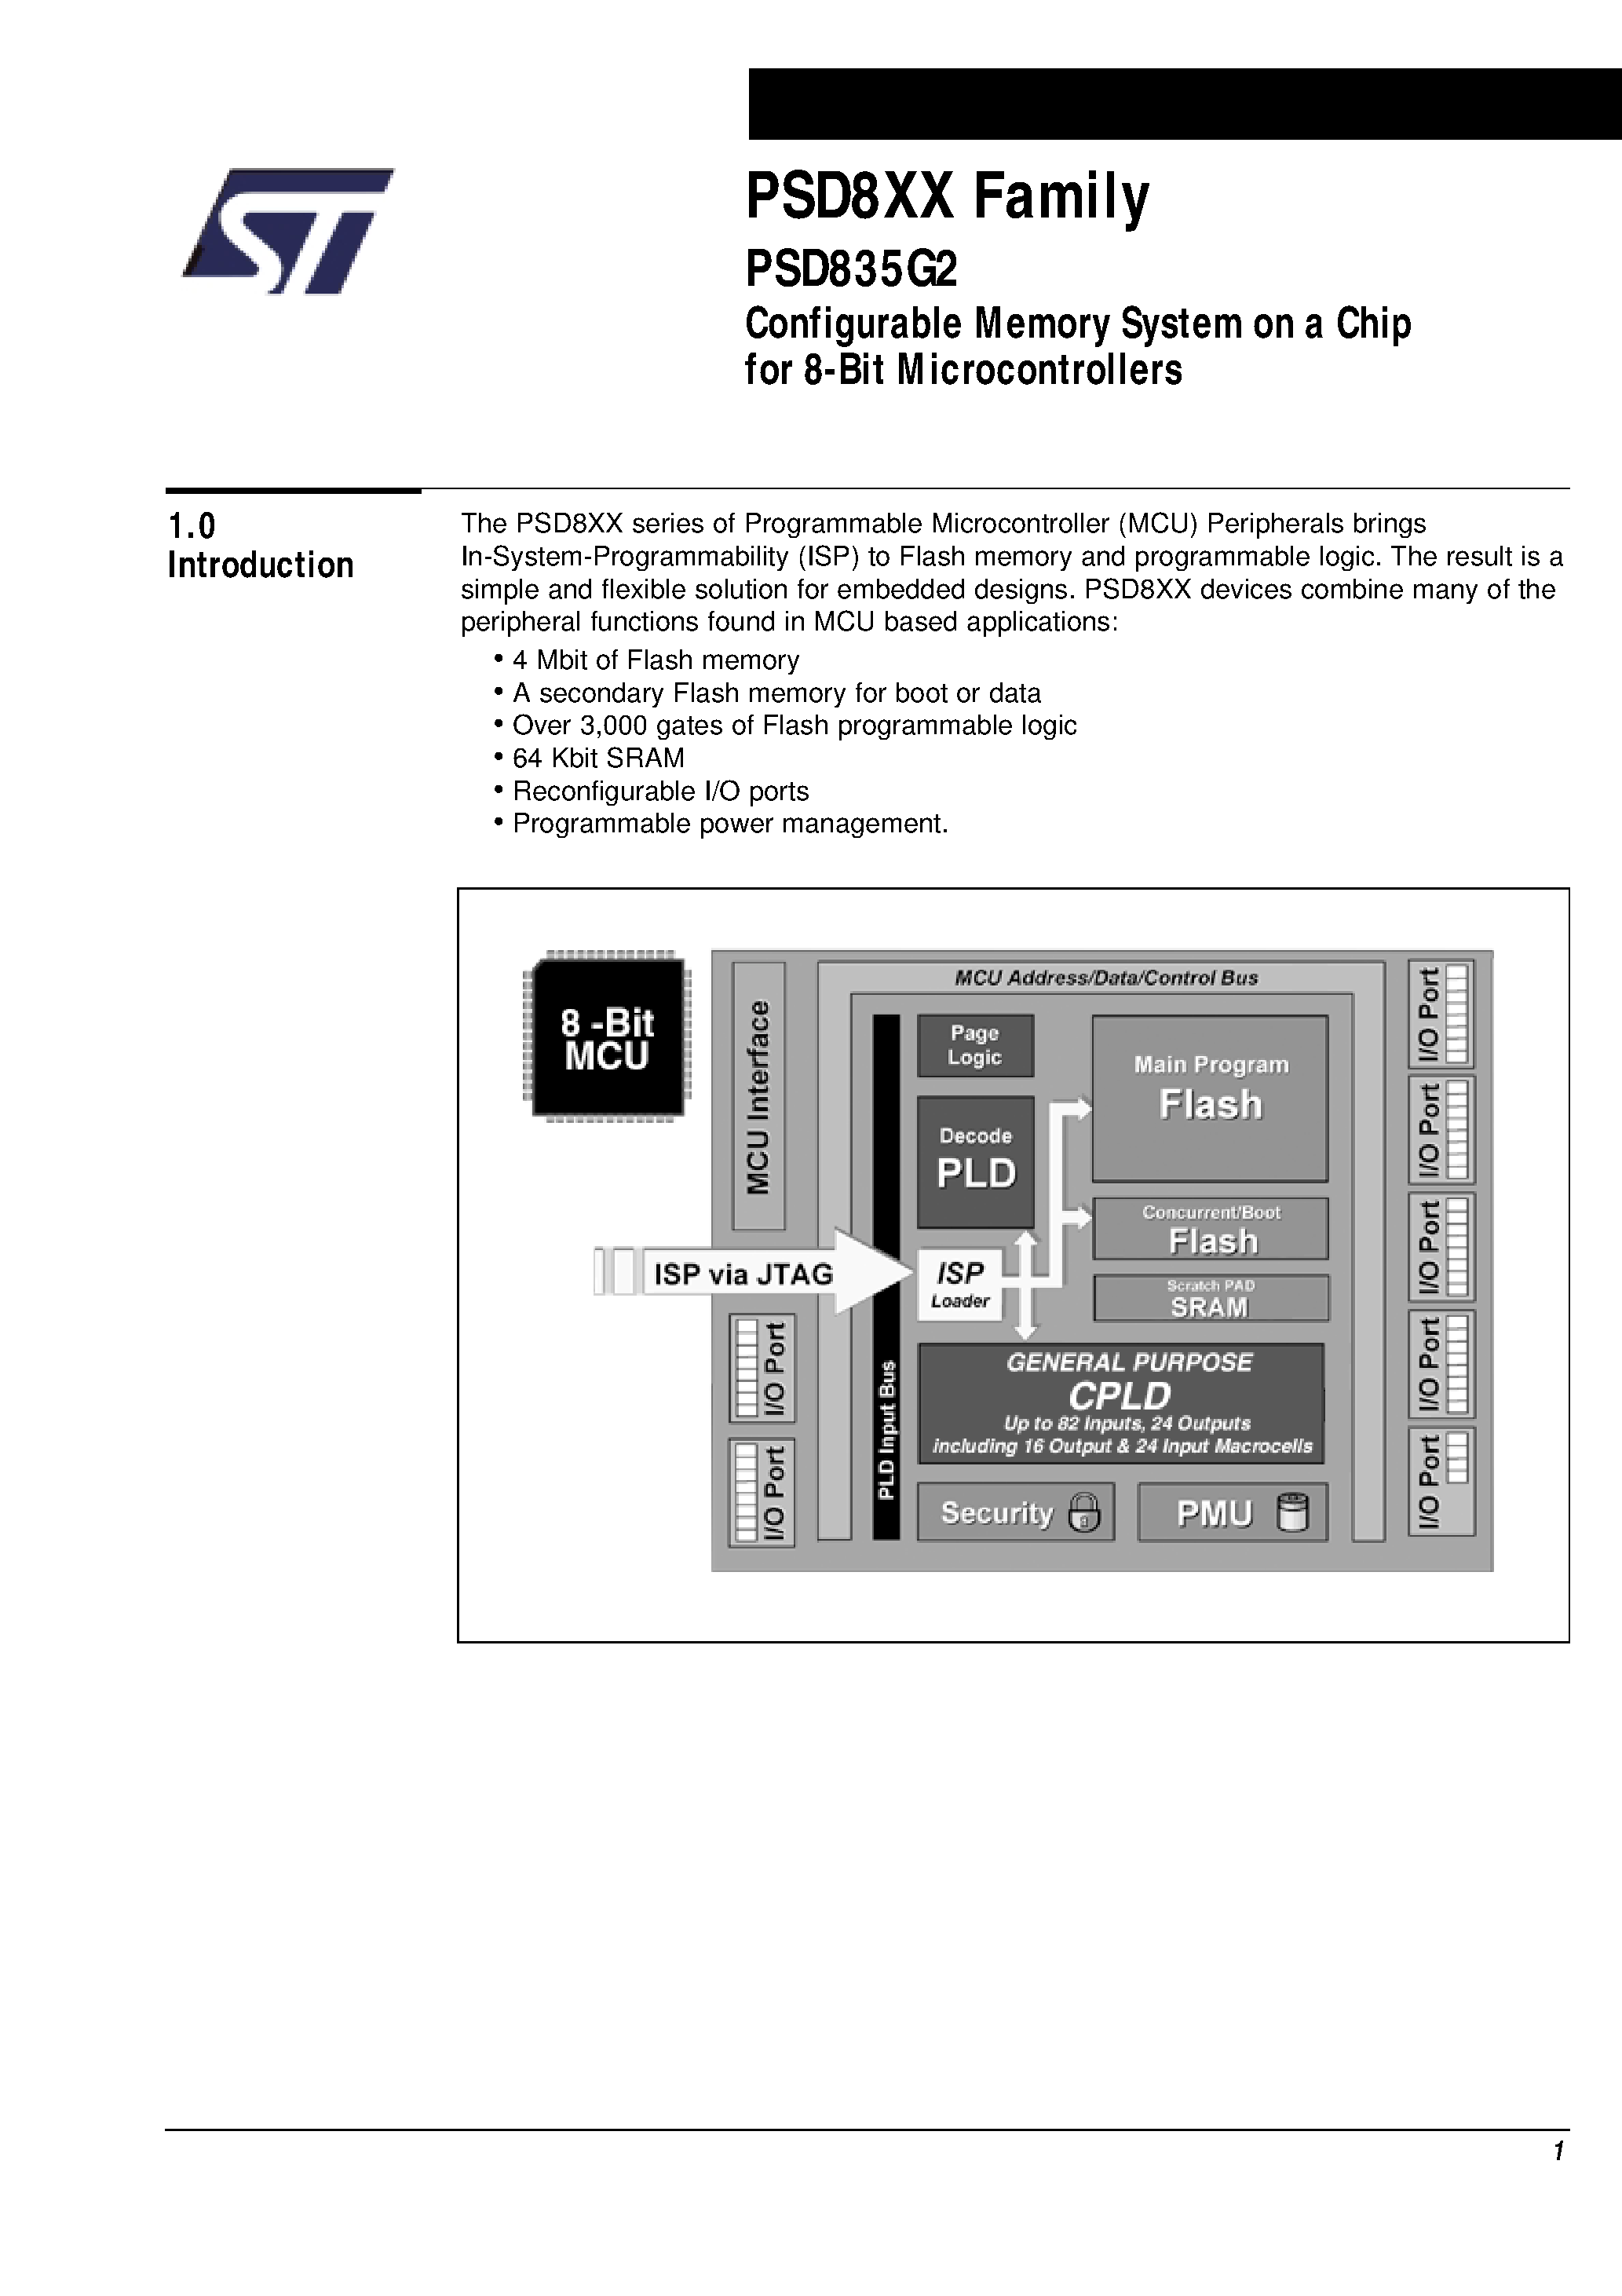 Datasheet PSD835F1V-A-12MI - Configurable Memory System on a Chip for 8-Bit Microcontrollers page 2